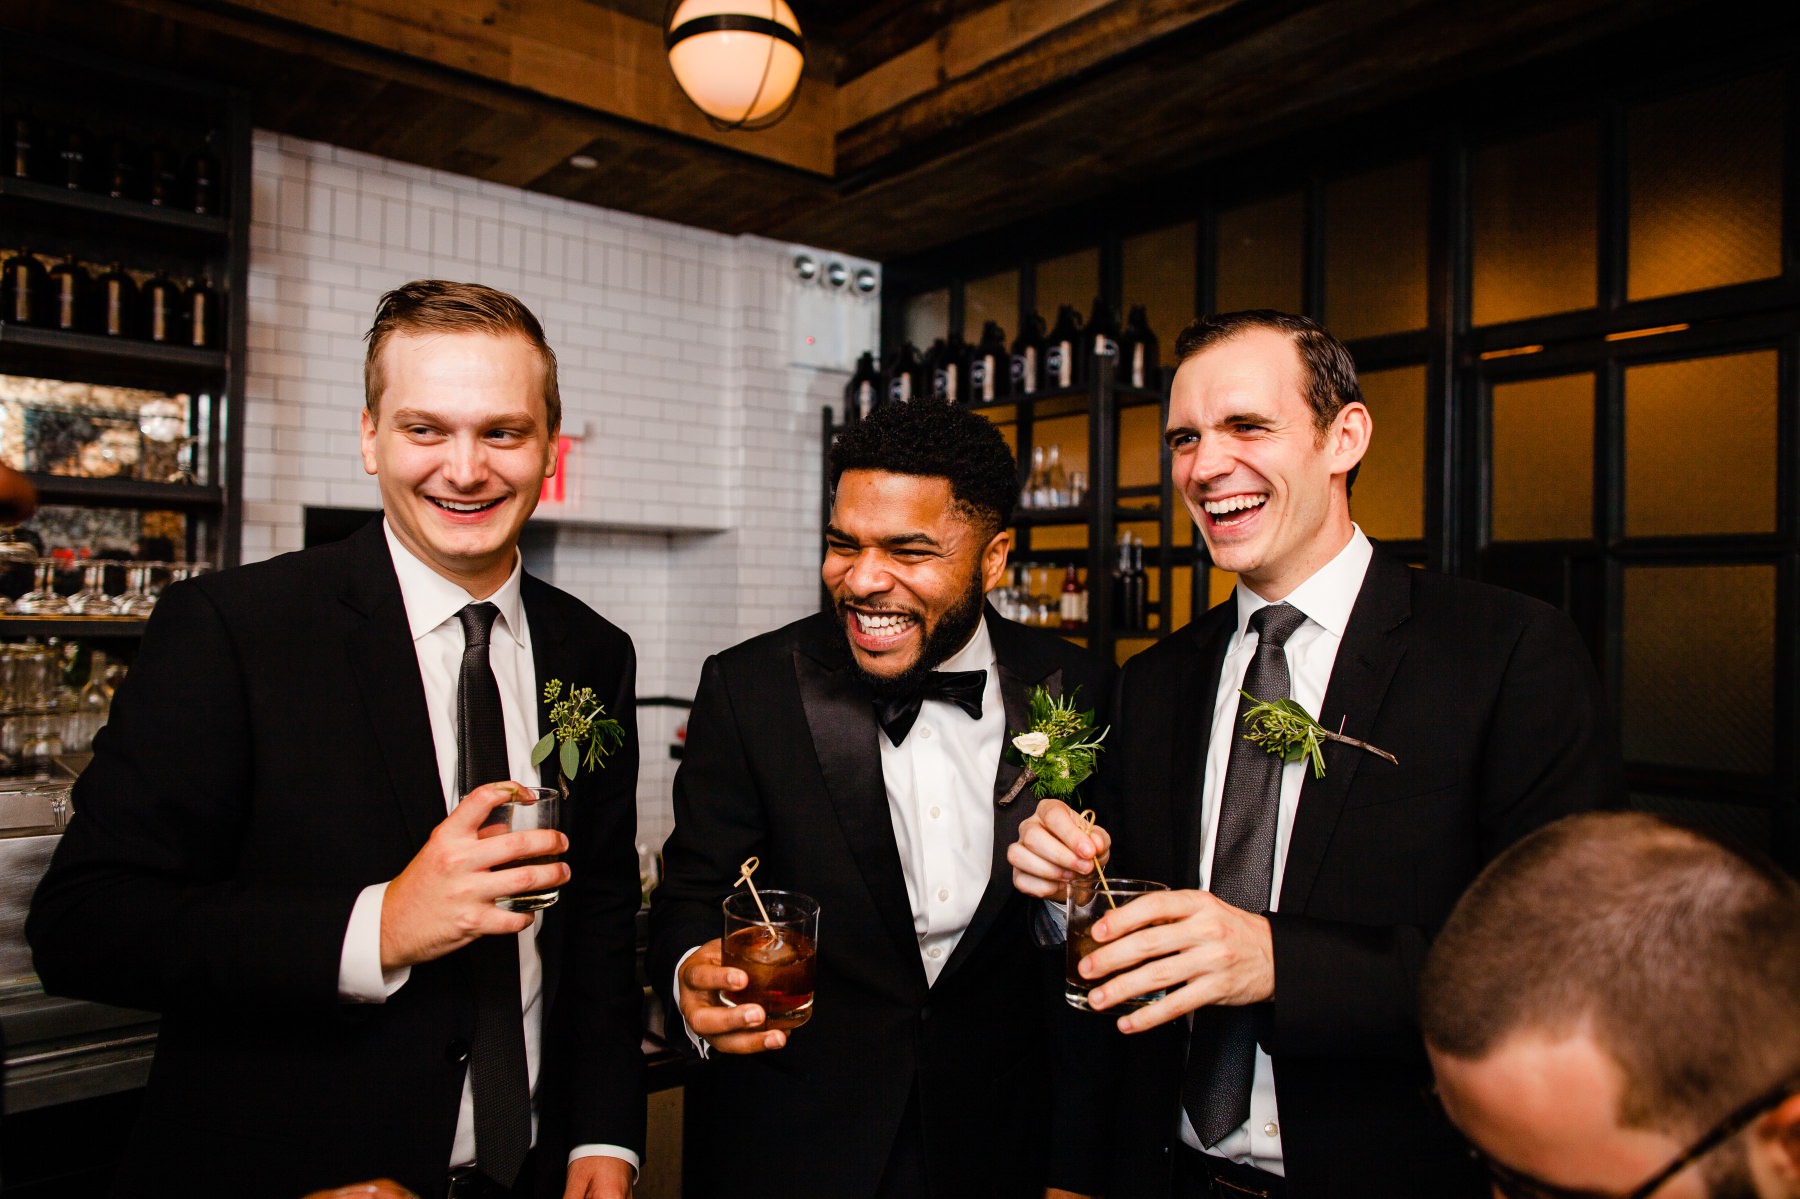  Caitlin and Bryon's wedding near Madison Square Park at the Giraffe Hotel in Midtown Manhattan. We approached this day as photjournalist wedding photographers first, aiming to create natural, authentic, but creative photos that tell an emotional and